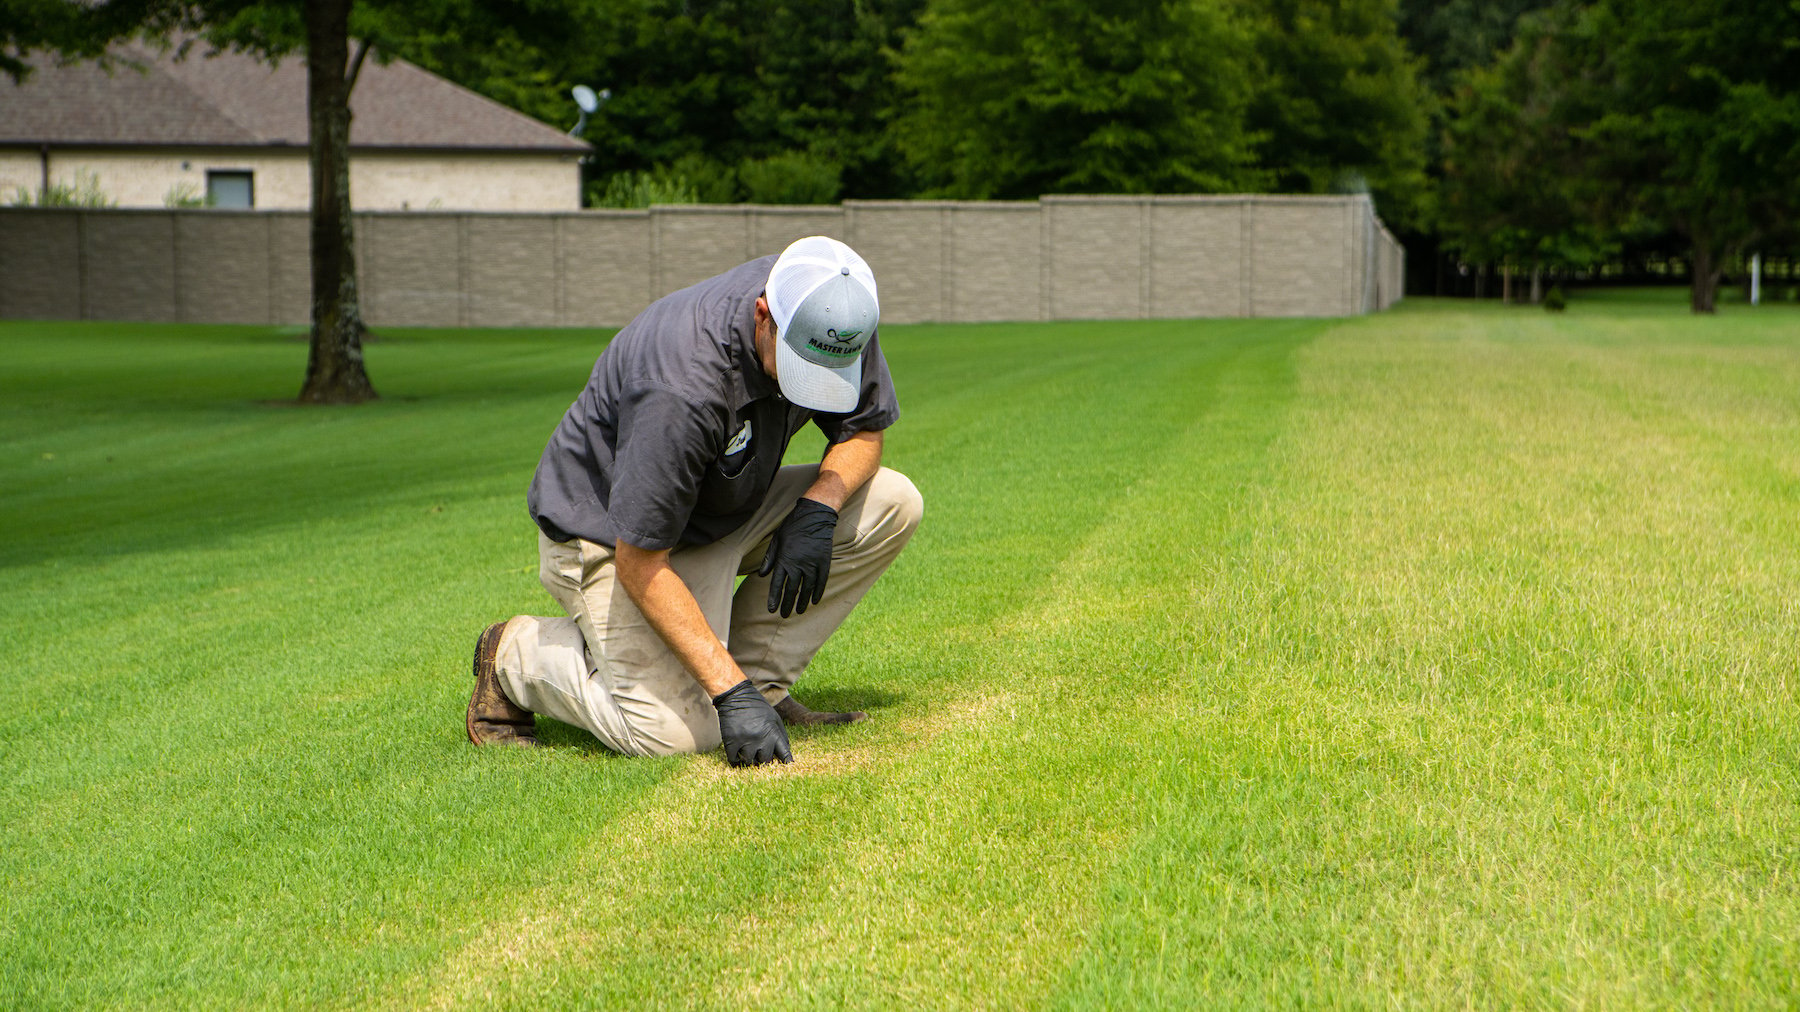 lawn care technician inspecting a lawn before spraying